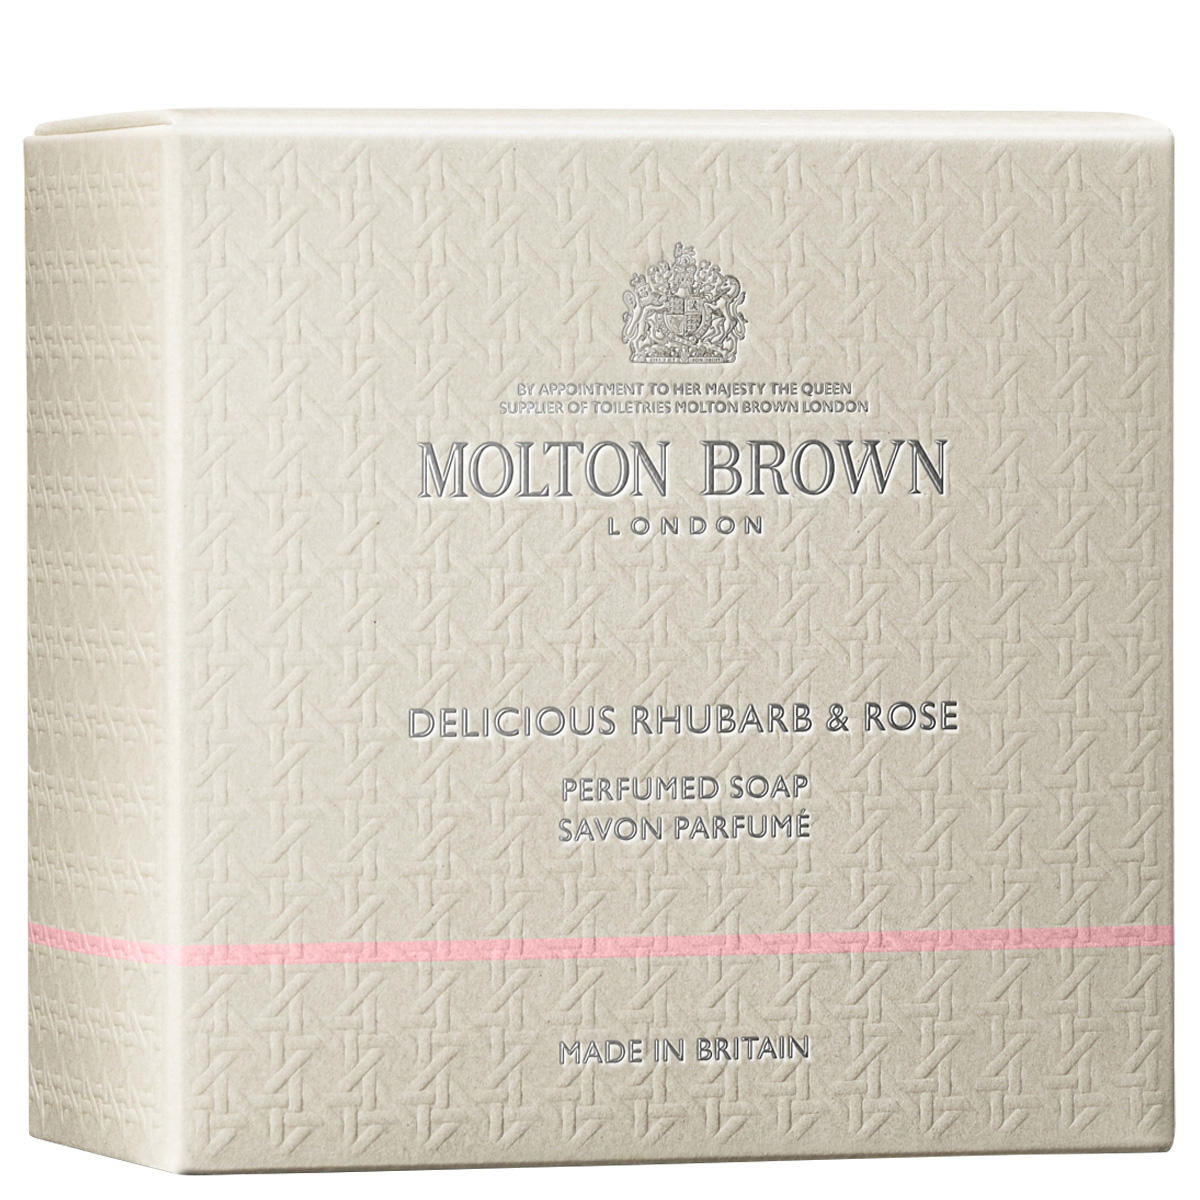 MOLTON BROWN Delicious Rhubarb & Rose Perfumed Soap 150 g - 4